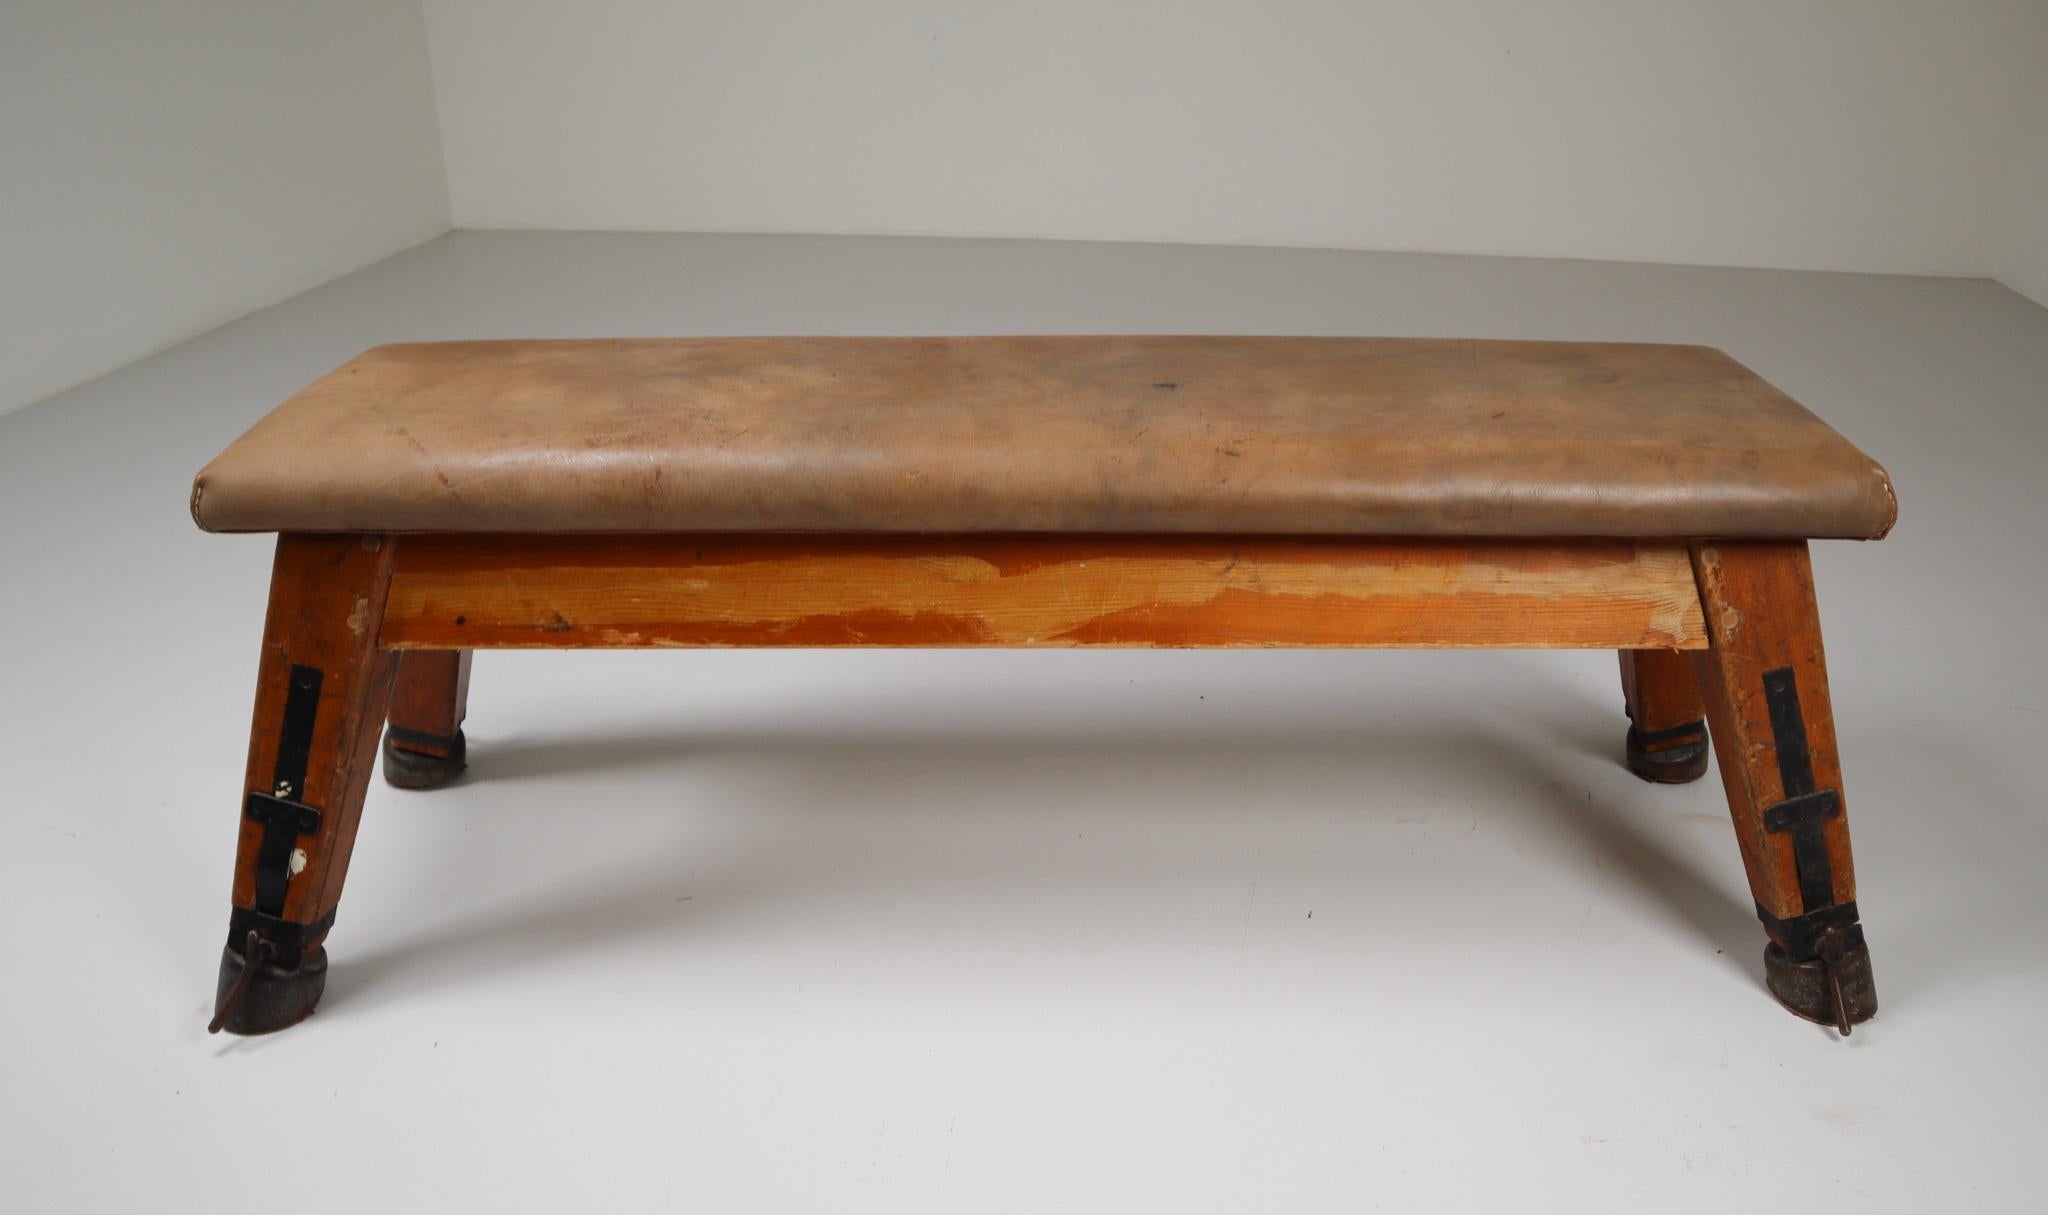 20th Century European Vintage Patinated Leather Gym Bench or Table, circa 1950s